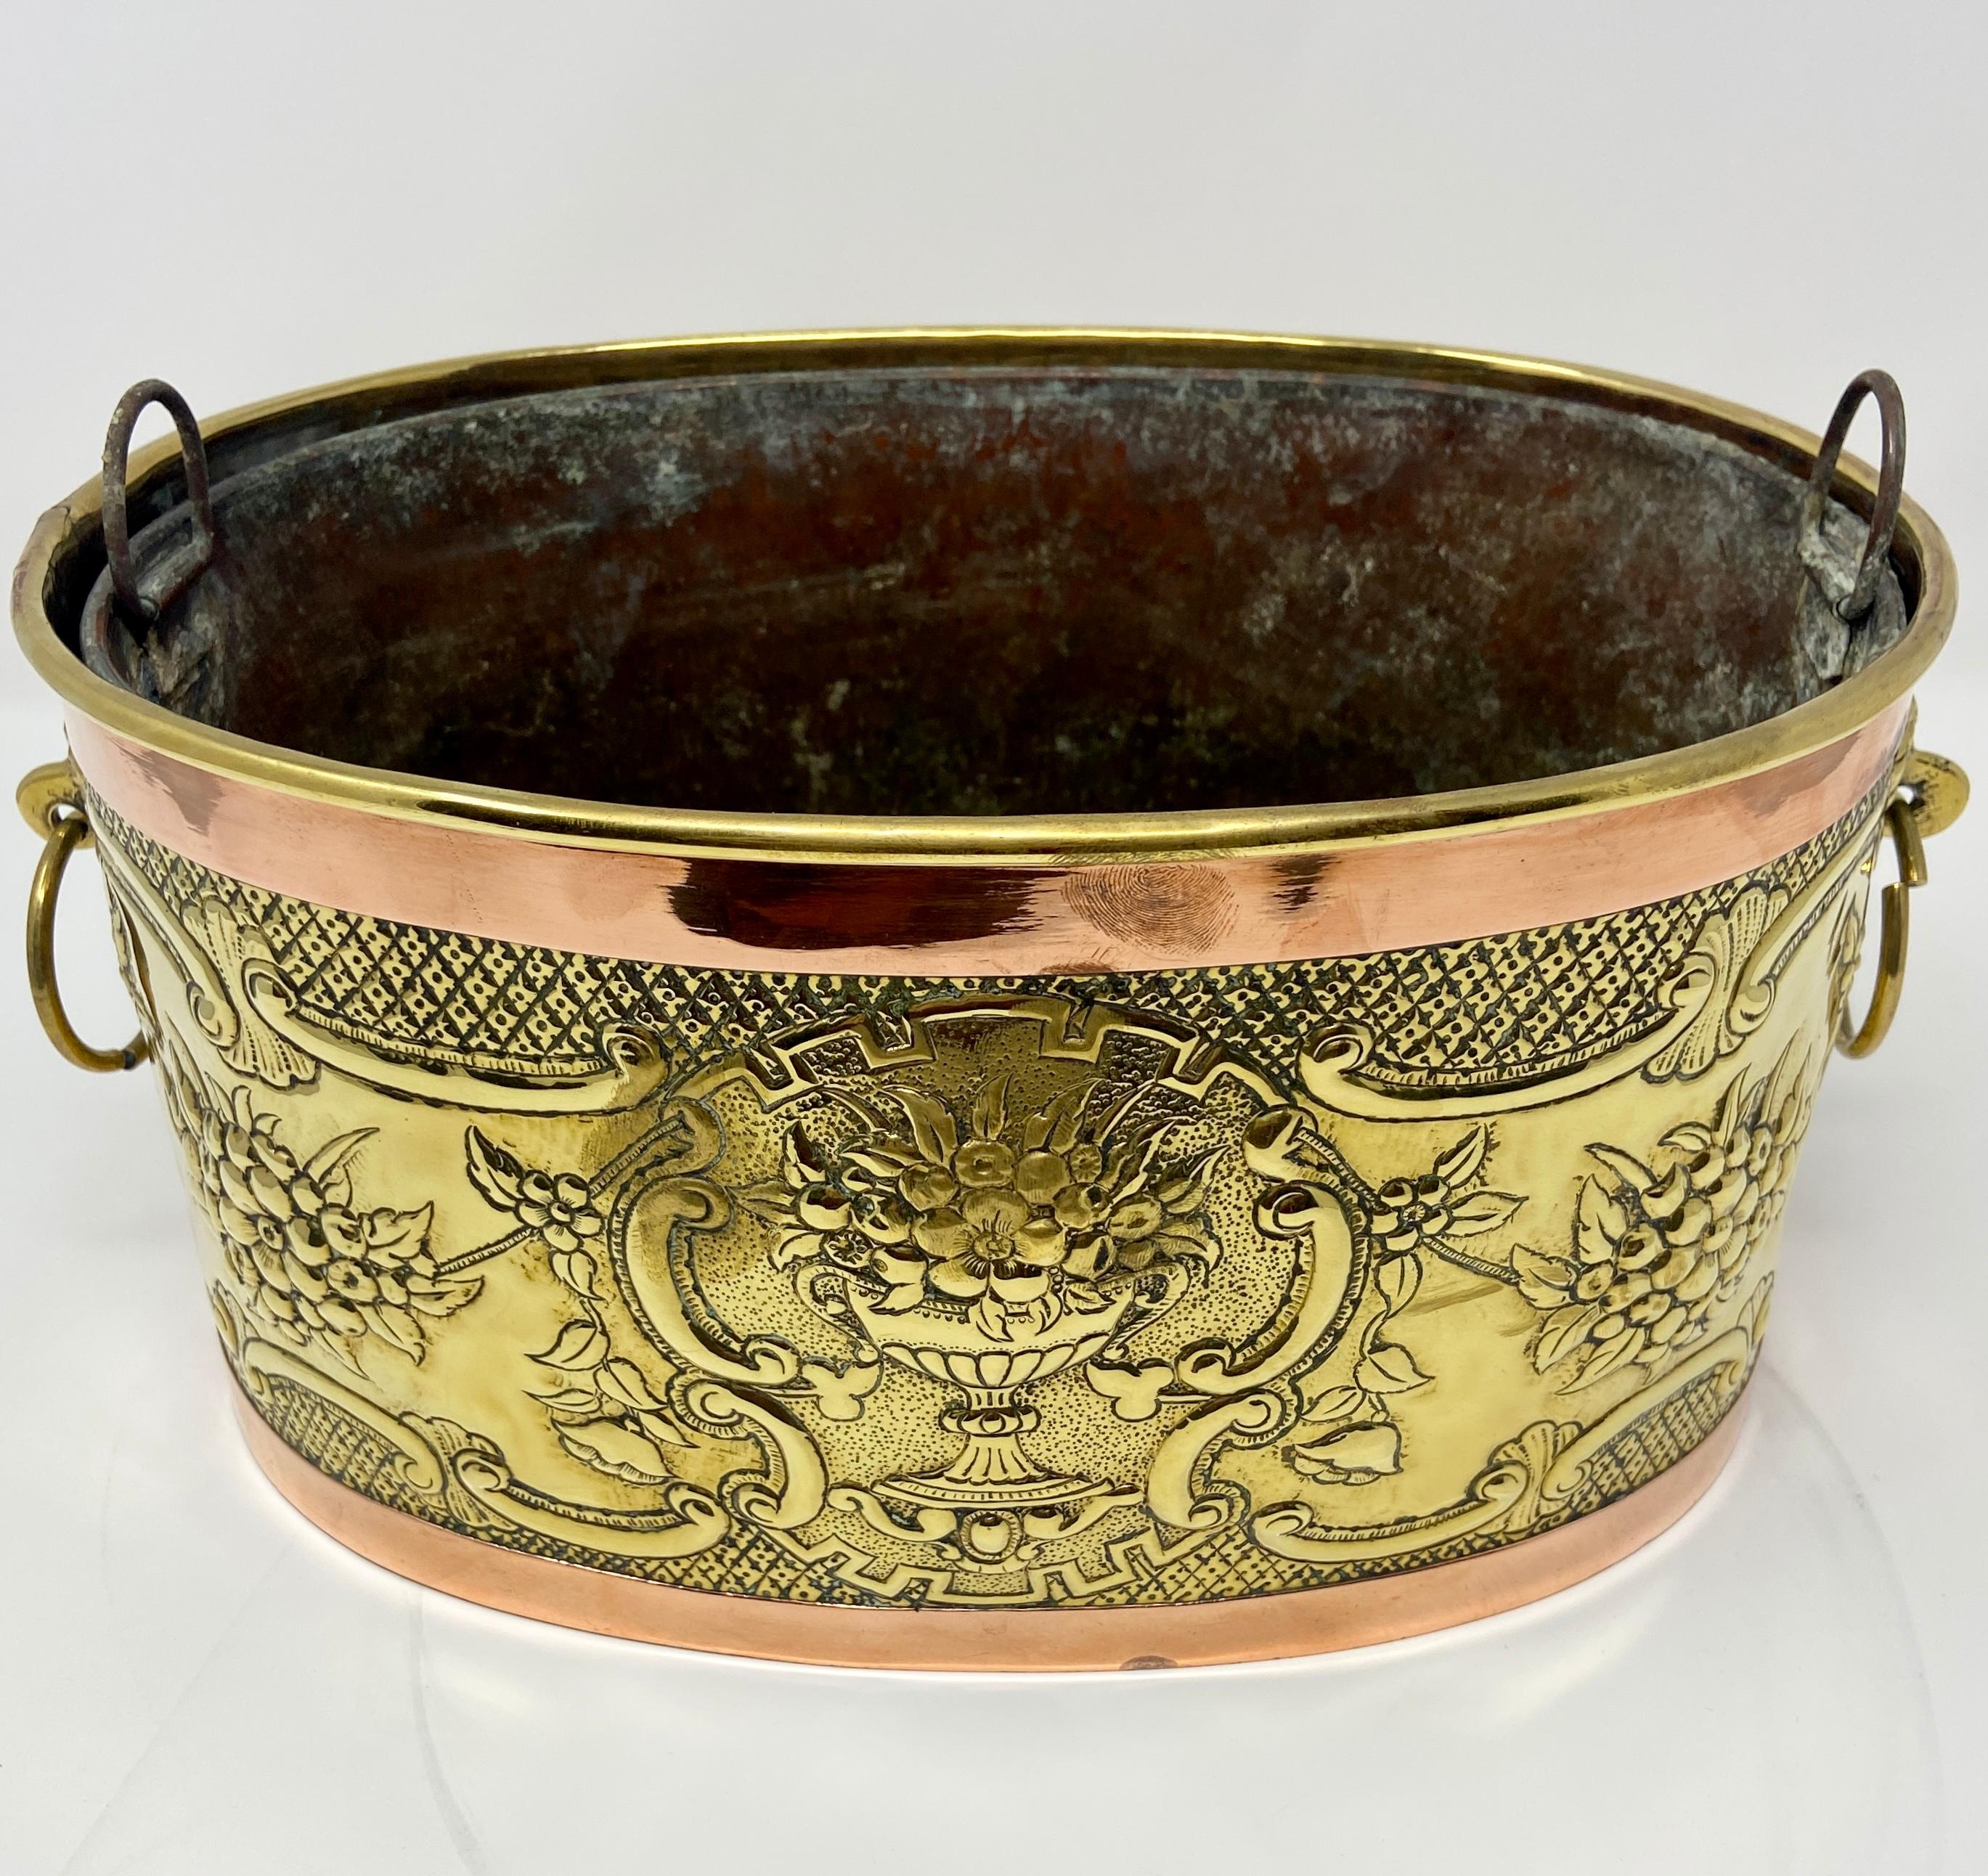 Antique brass and copper oval planter with liner circa 1890-1900.